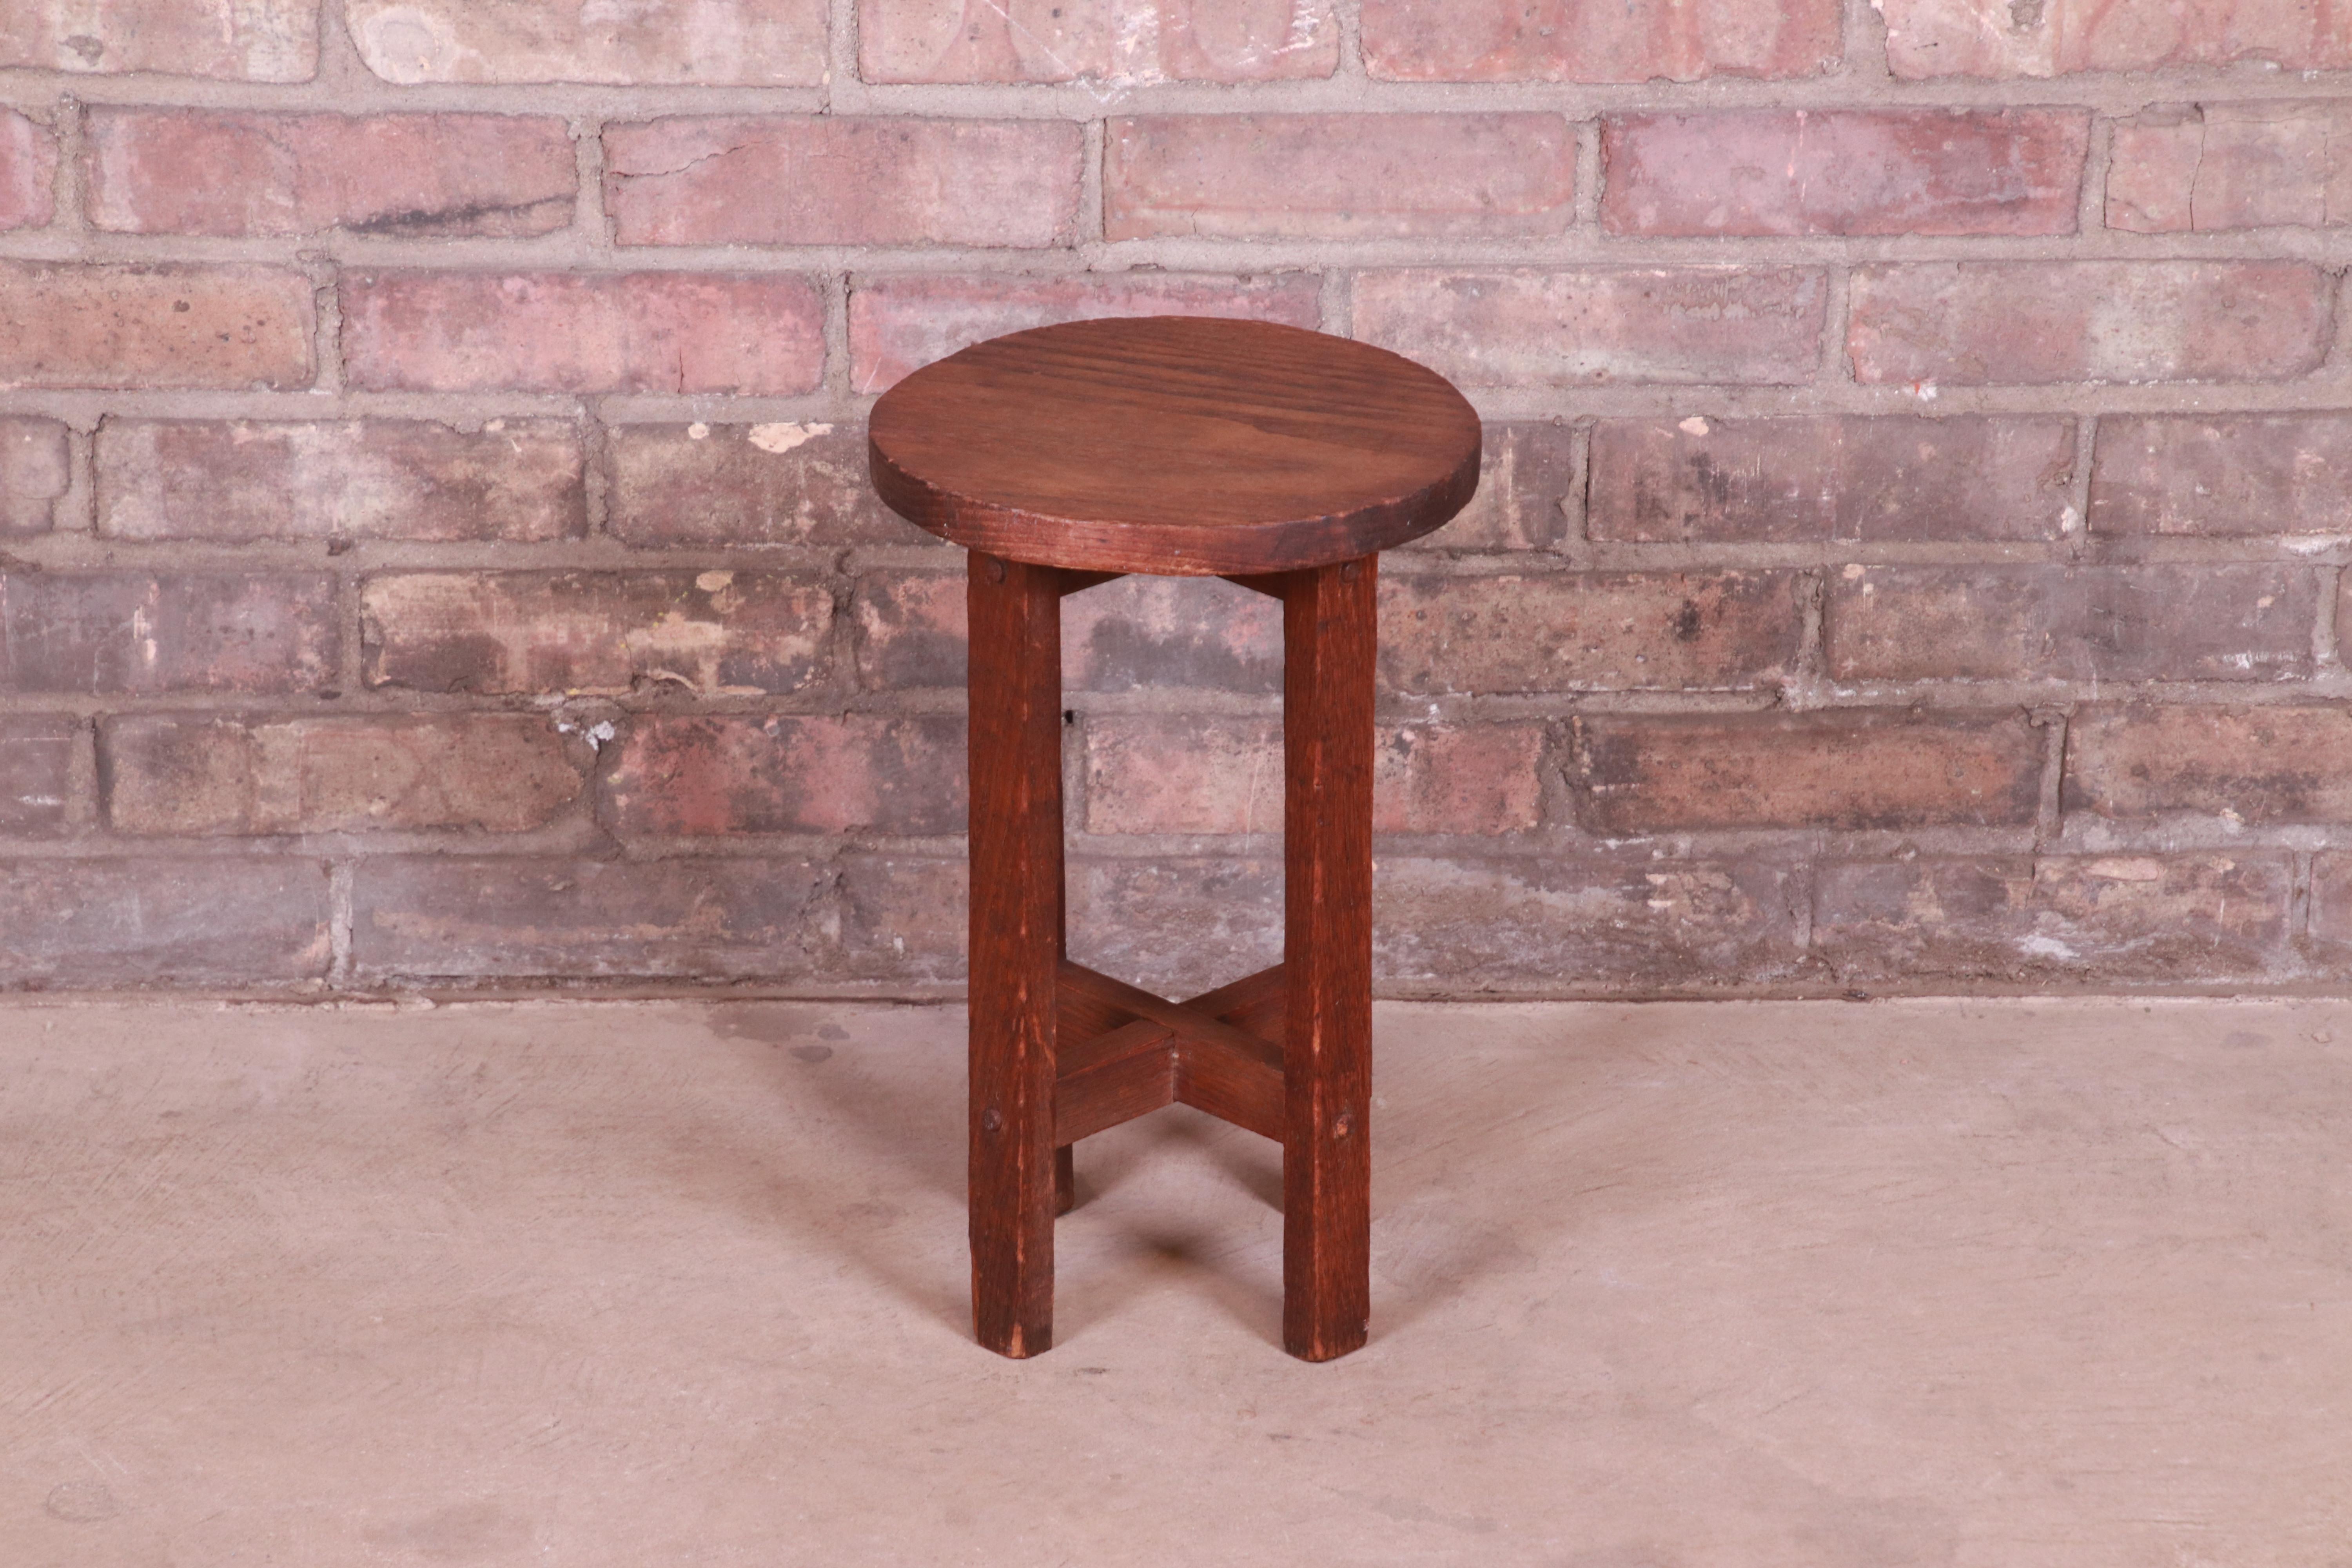 A nice antique Mission oak Arts & Crafts petite side table or tabouret

In the manner of Stickley (similar to No. 601 in 1909 Craftsman Furniture Catalogue)

USA, Circa 1900

Measures: 9.63